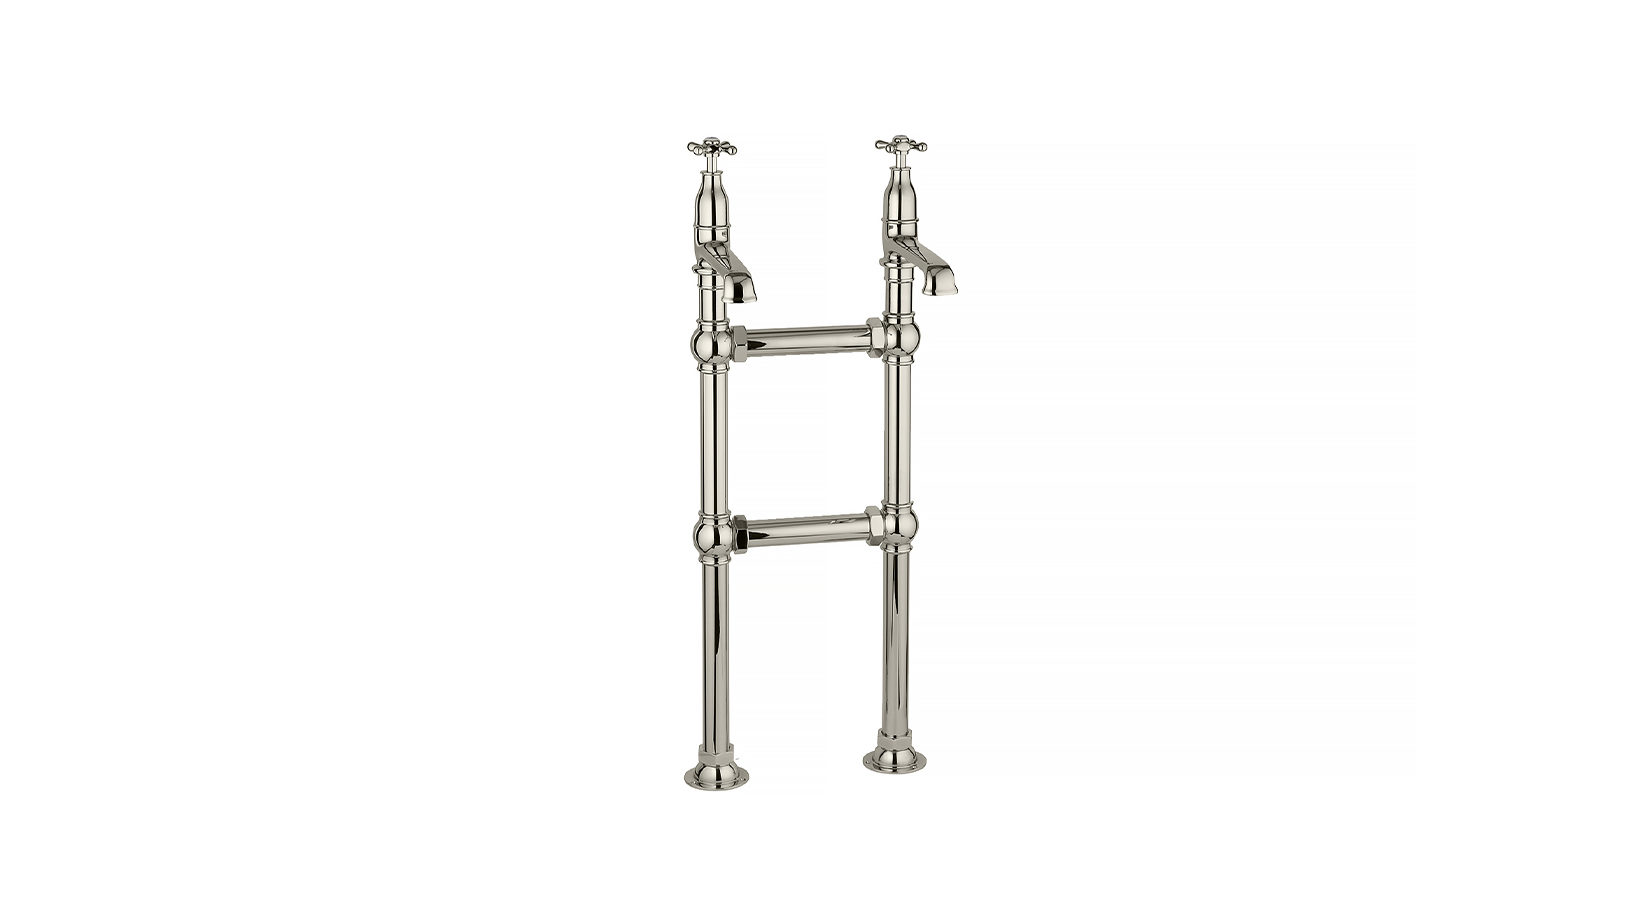 The Mull Classic Bath Taps & H Stand